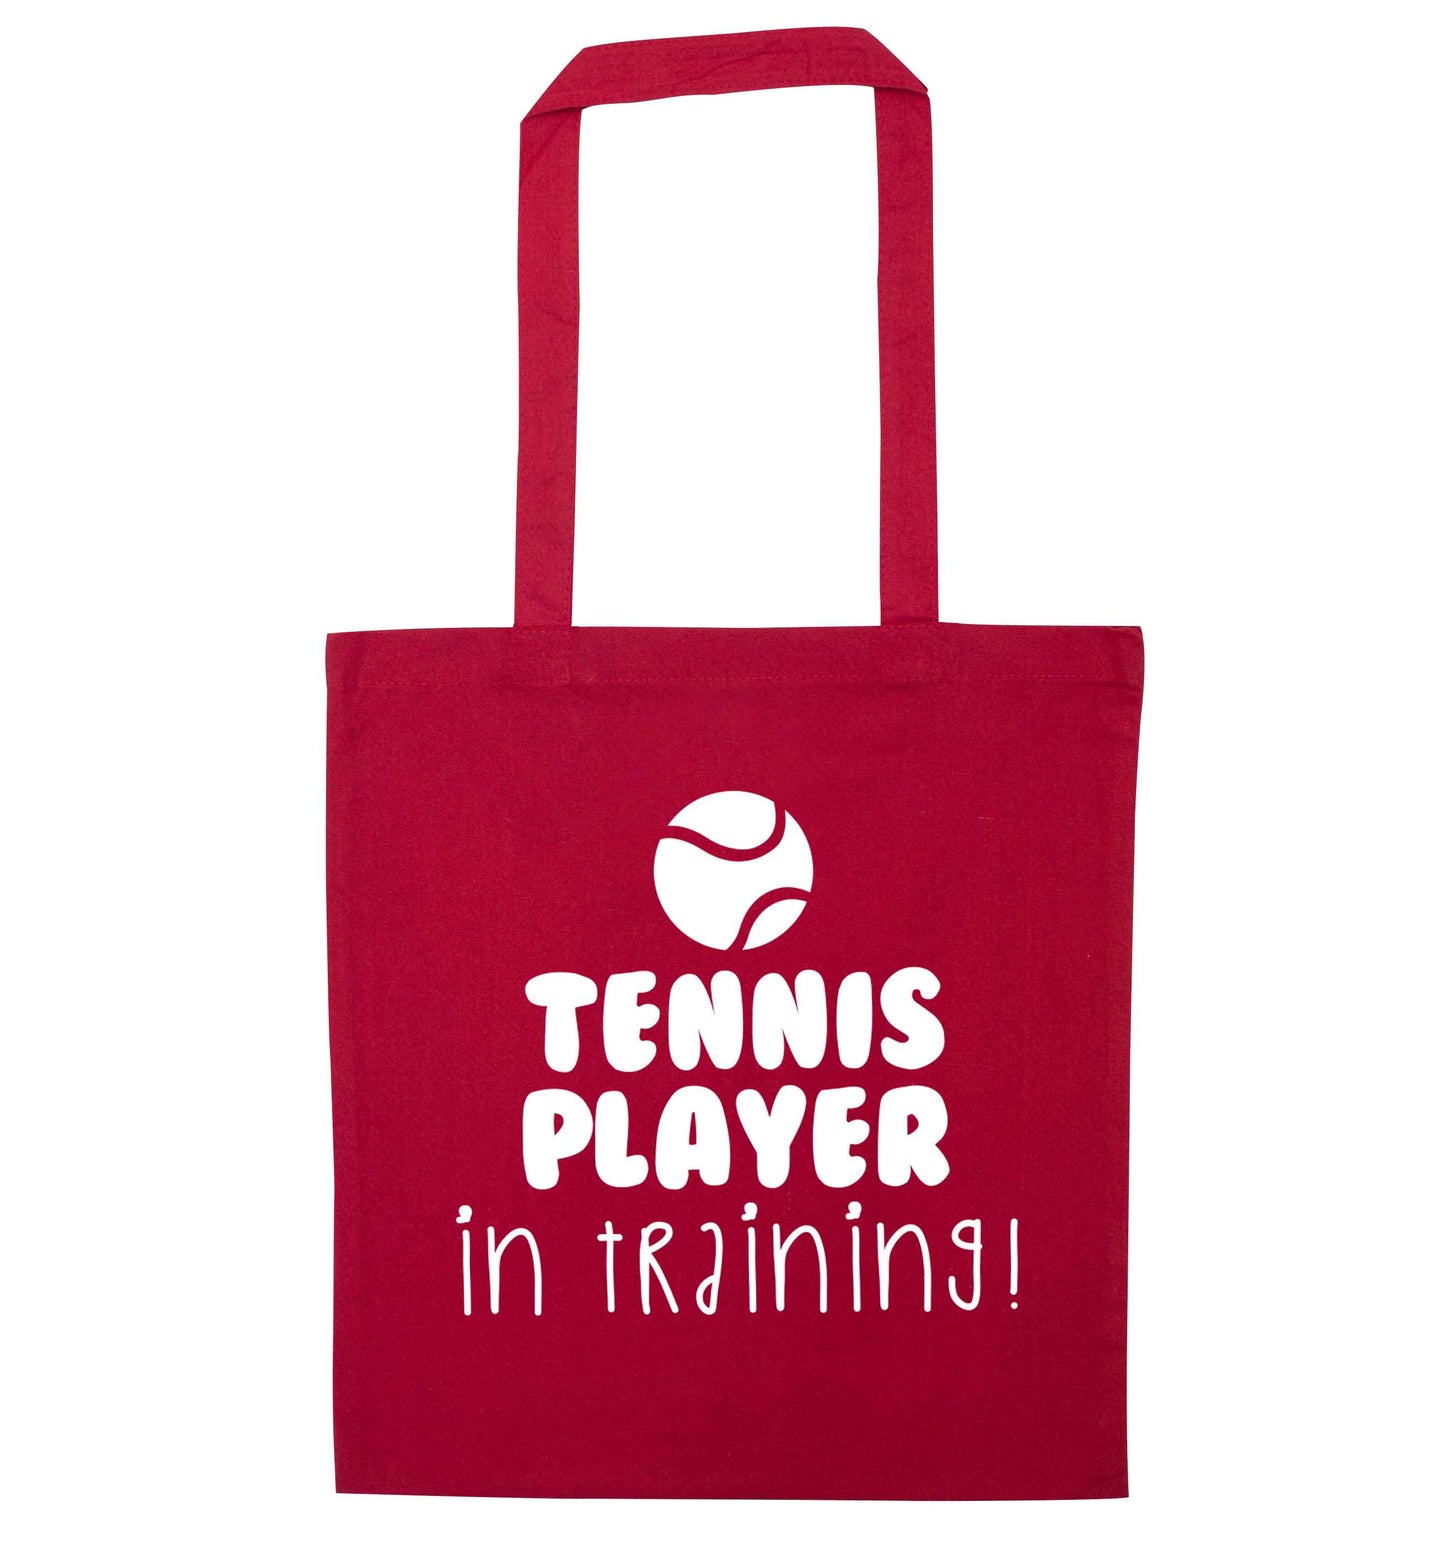 Tennis player in training red tote bag